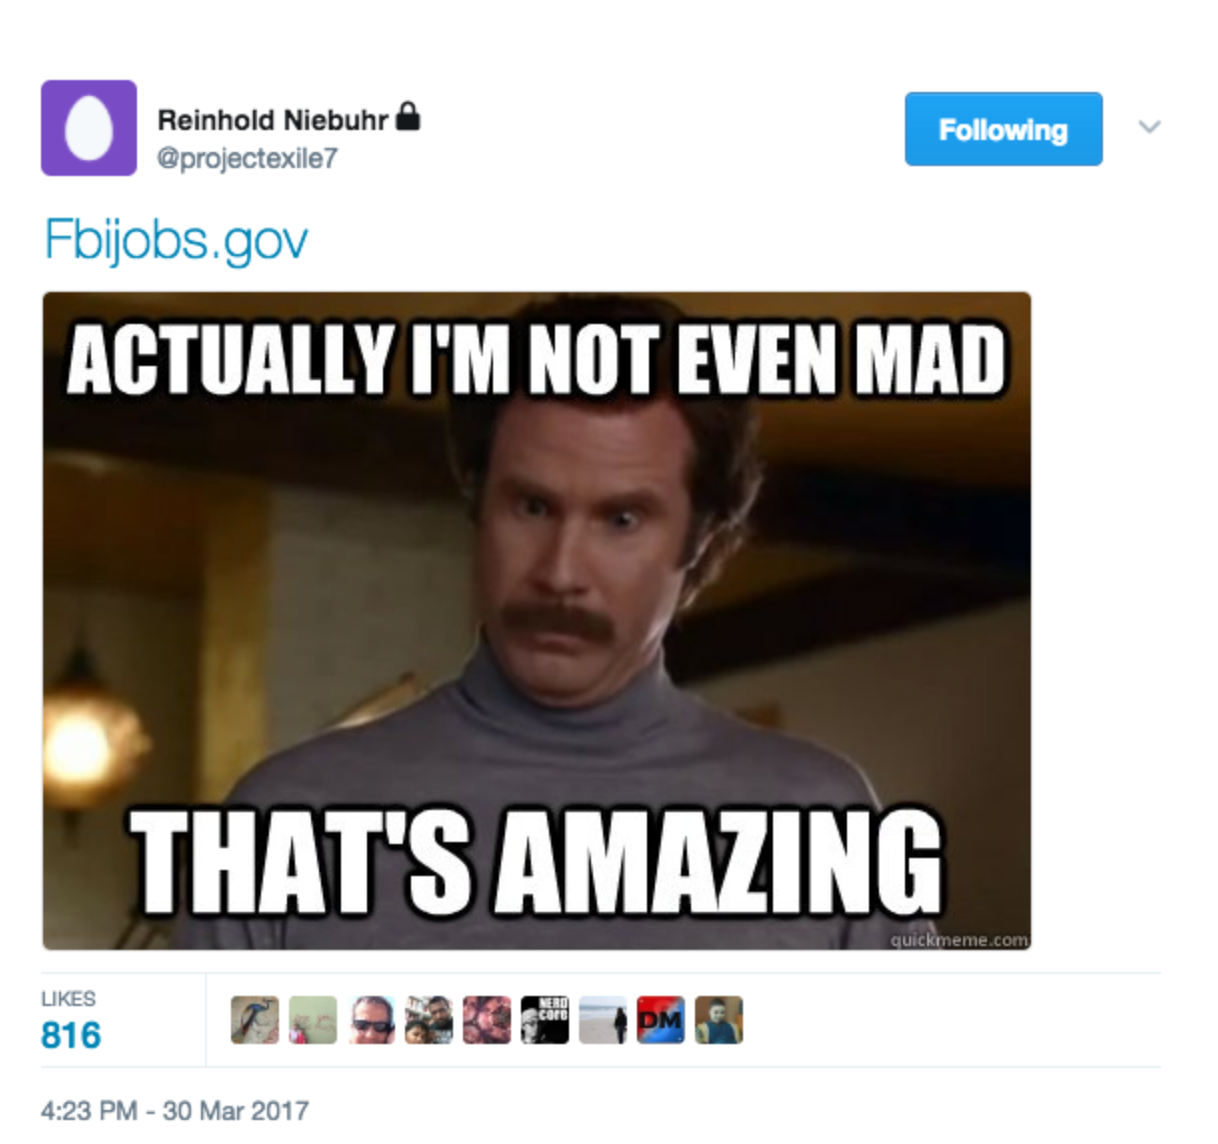 Anchorman Meme Adds New Twist To James Comey Twitter Mystery